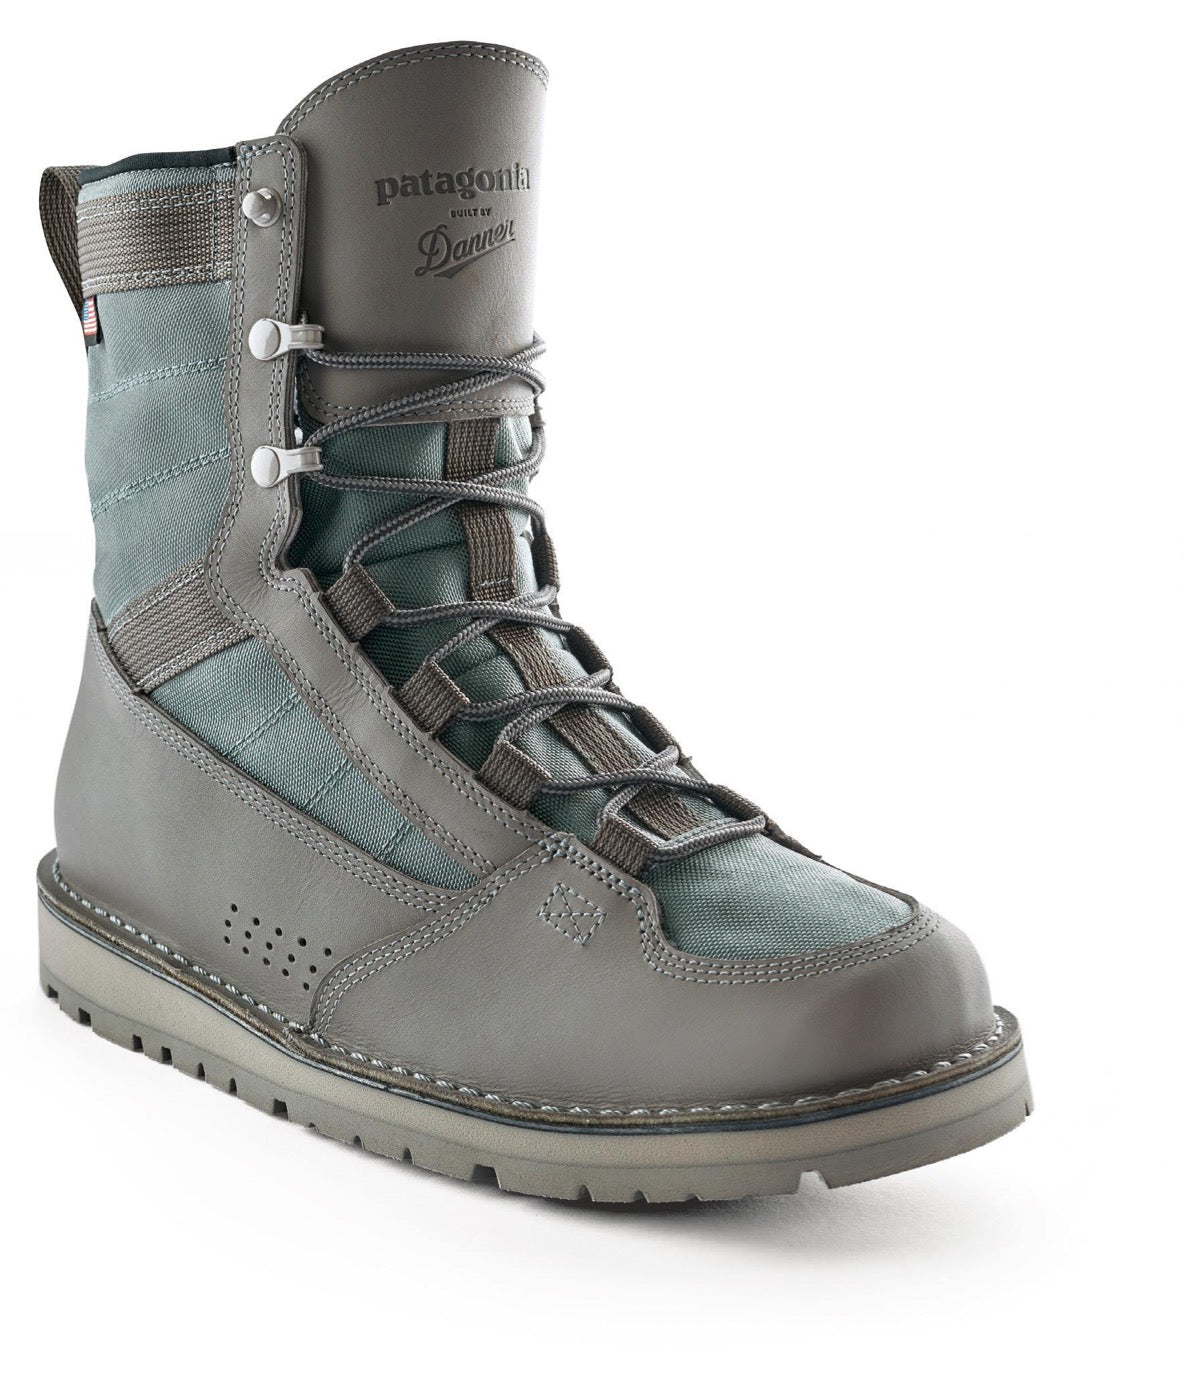 Women's Clearwater Wading Boots - Rubber Sole - Kootenay Fly Shop